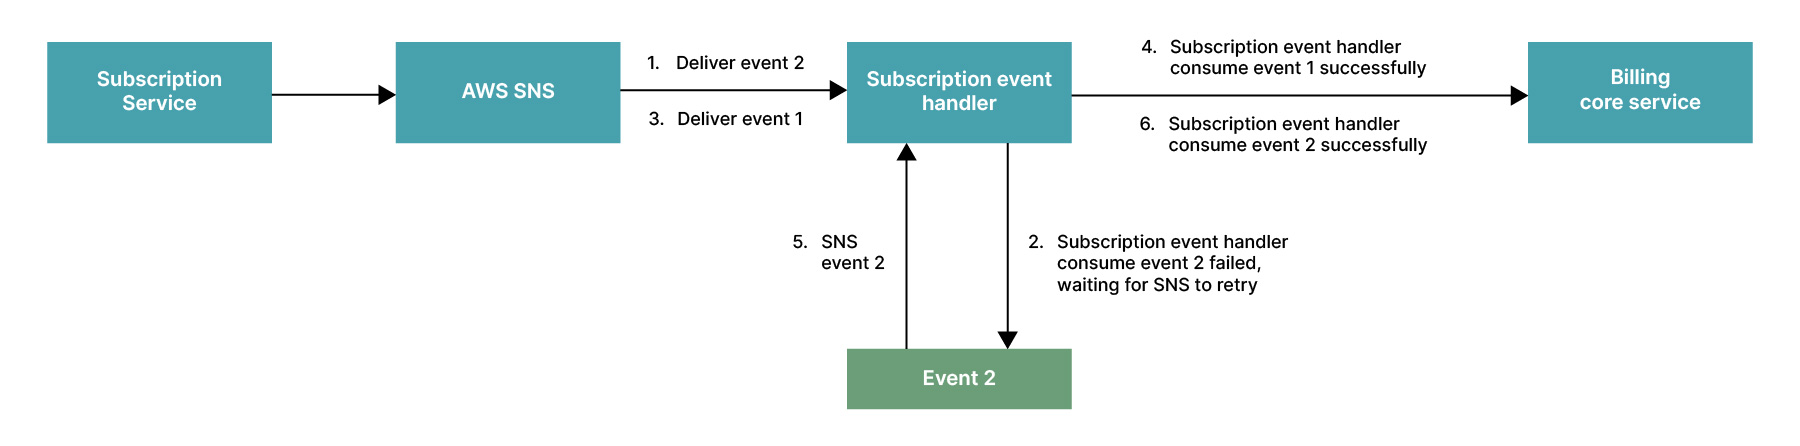 Order of events in EDA implementation